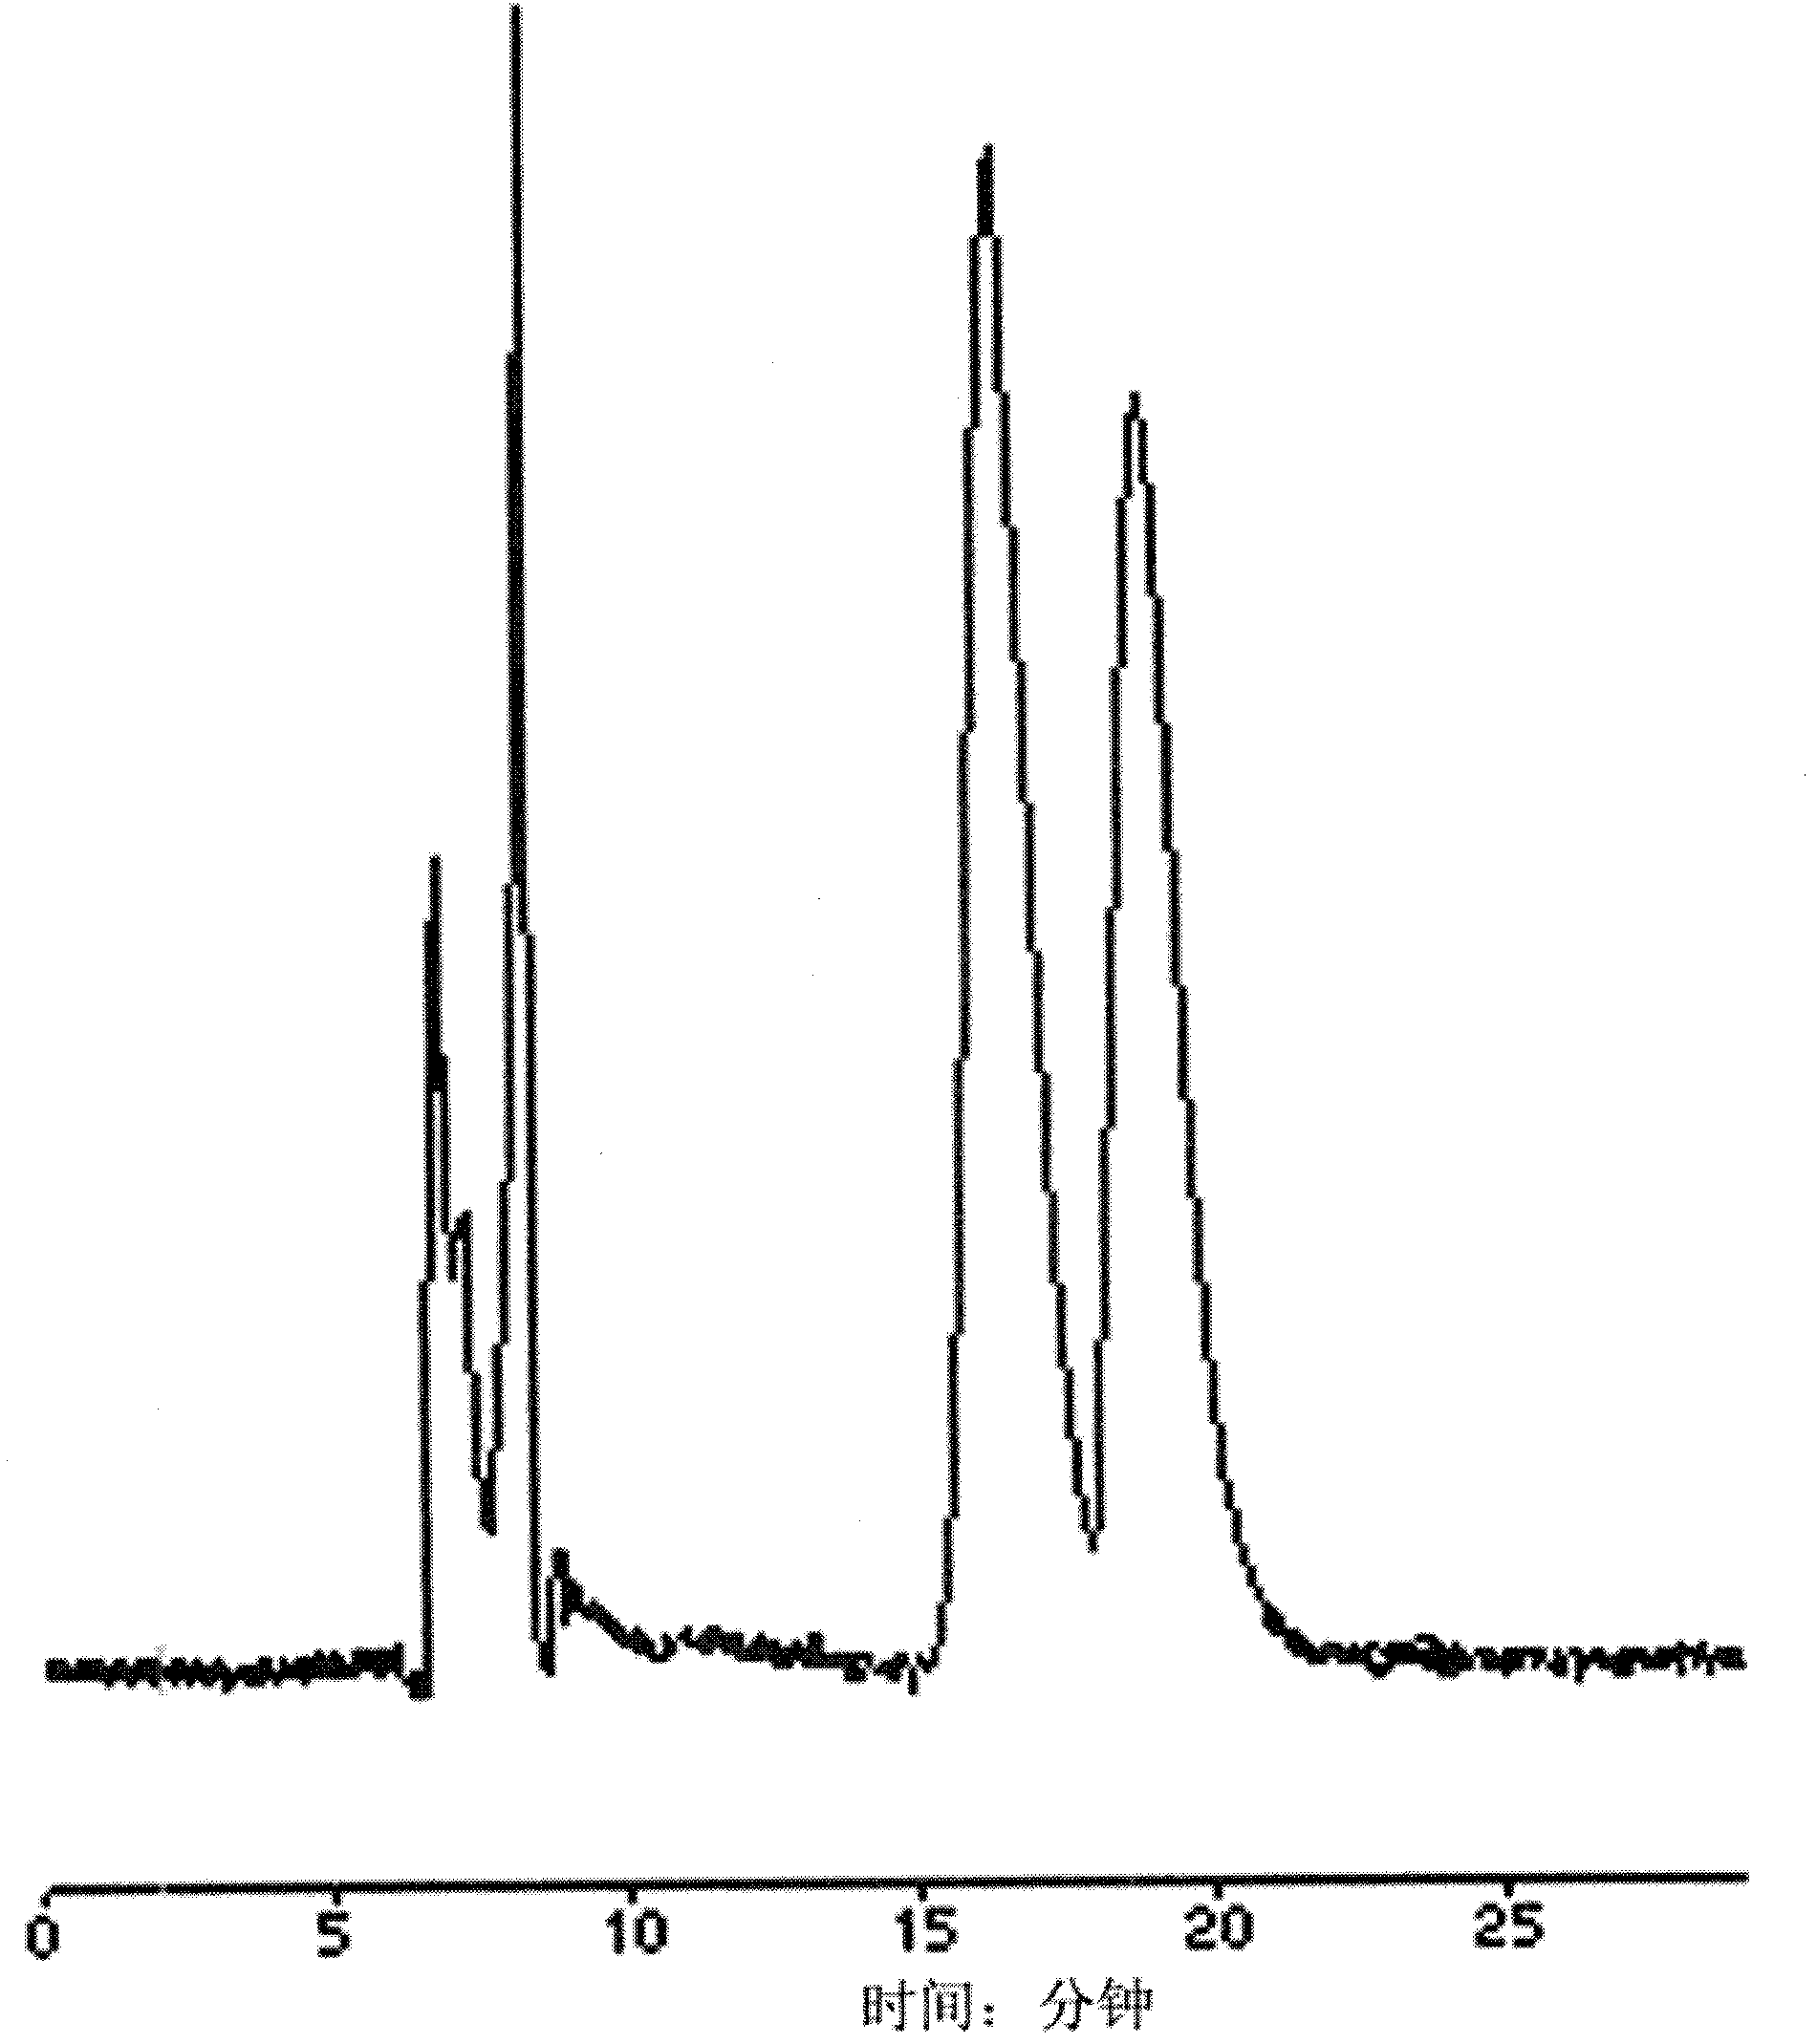 Method for analyzing chiral drug enantiomers in biological body fluid through column-switching liquid chromatography